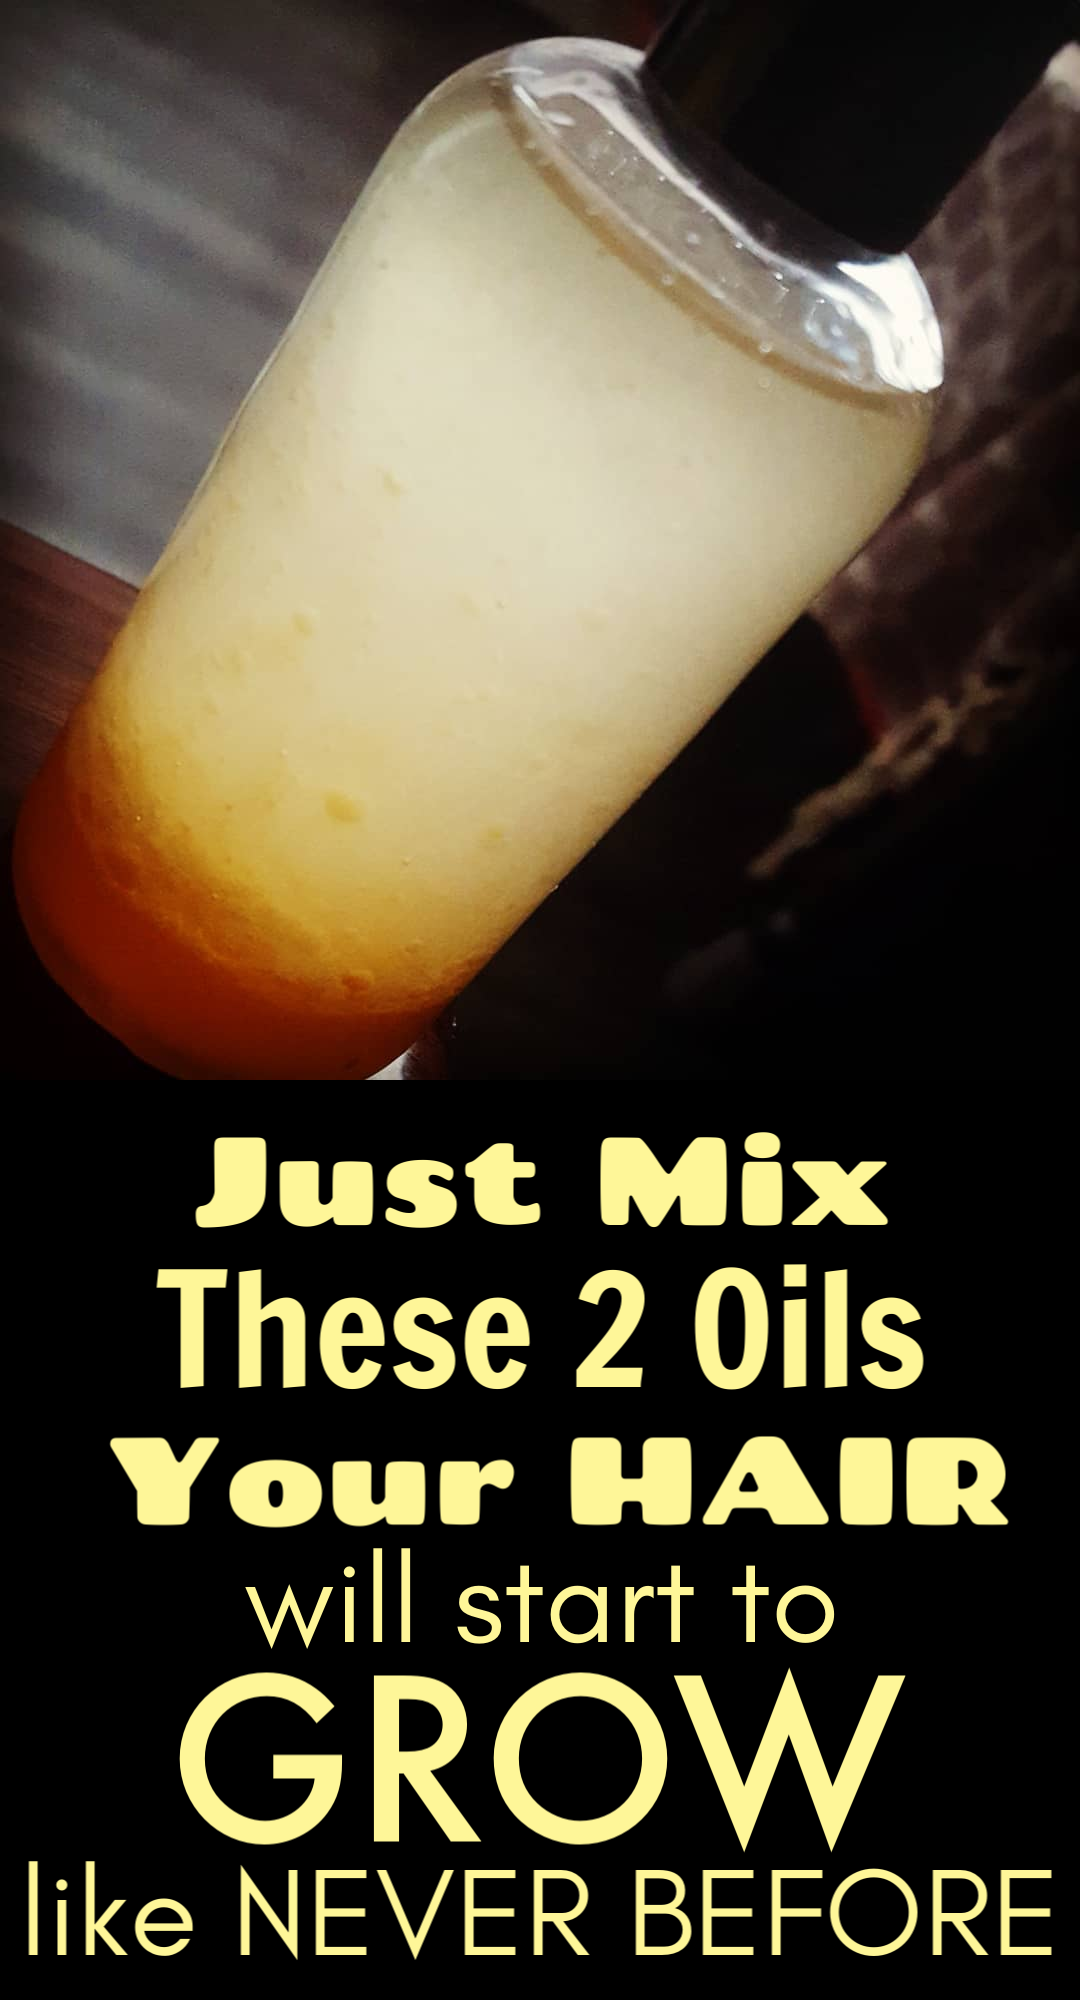 Mix these 4 oils together and use it daily, You will get long and problem free hairs in just 2 months -   12 hairstyles Quick healthy hair ideas